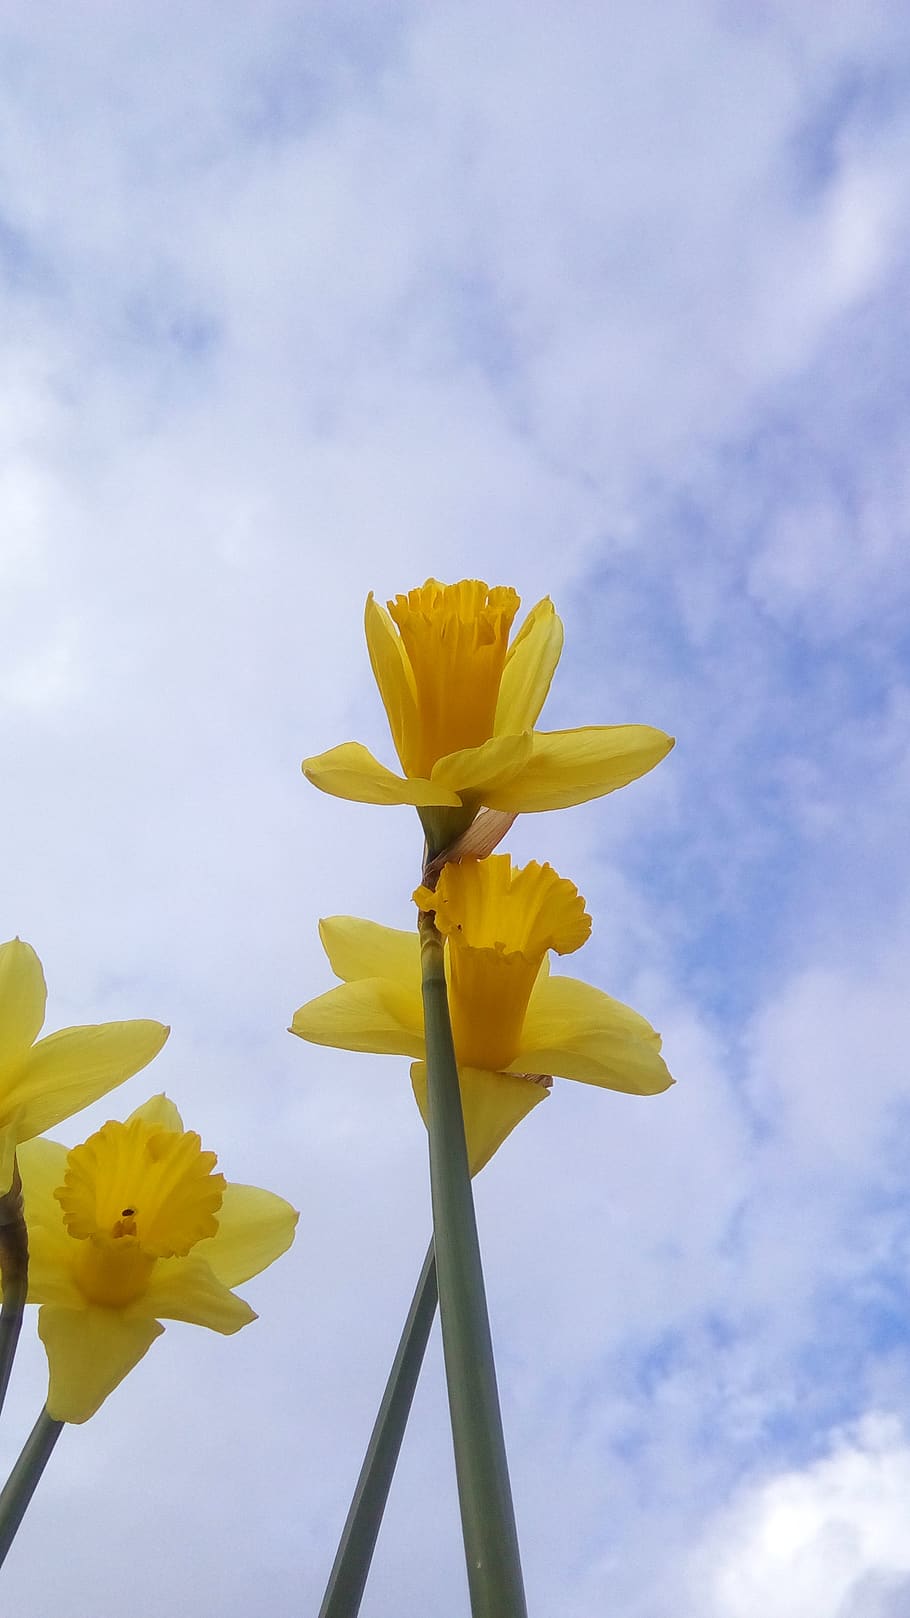 daffodils, yellow, flowers, nature, plants, winter, clouds, HD wallpaper